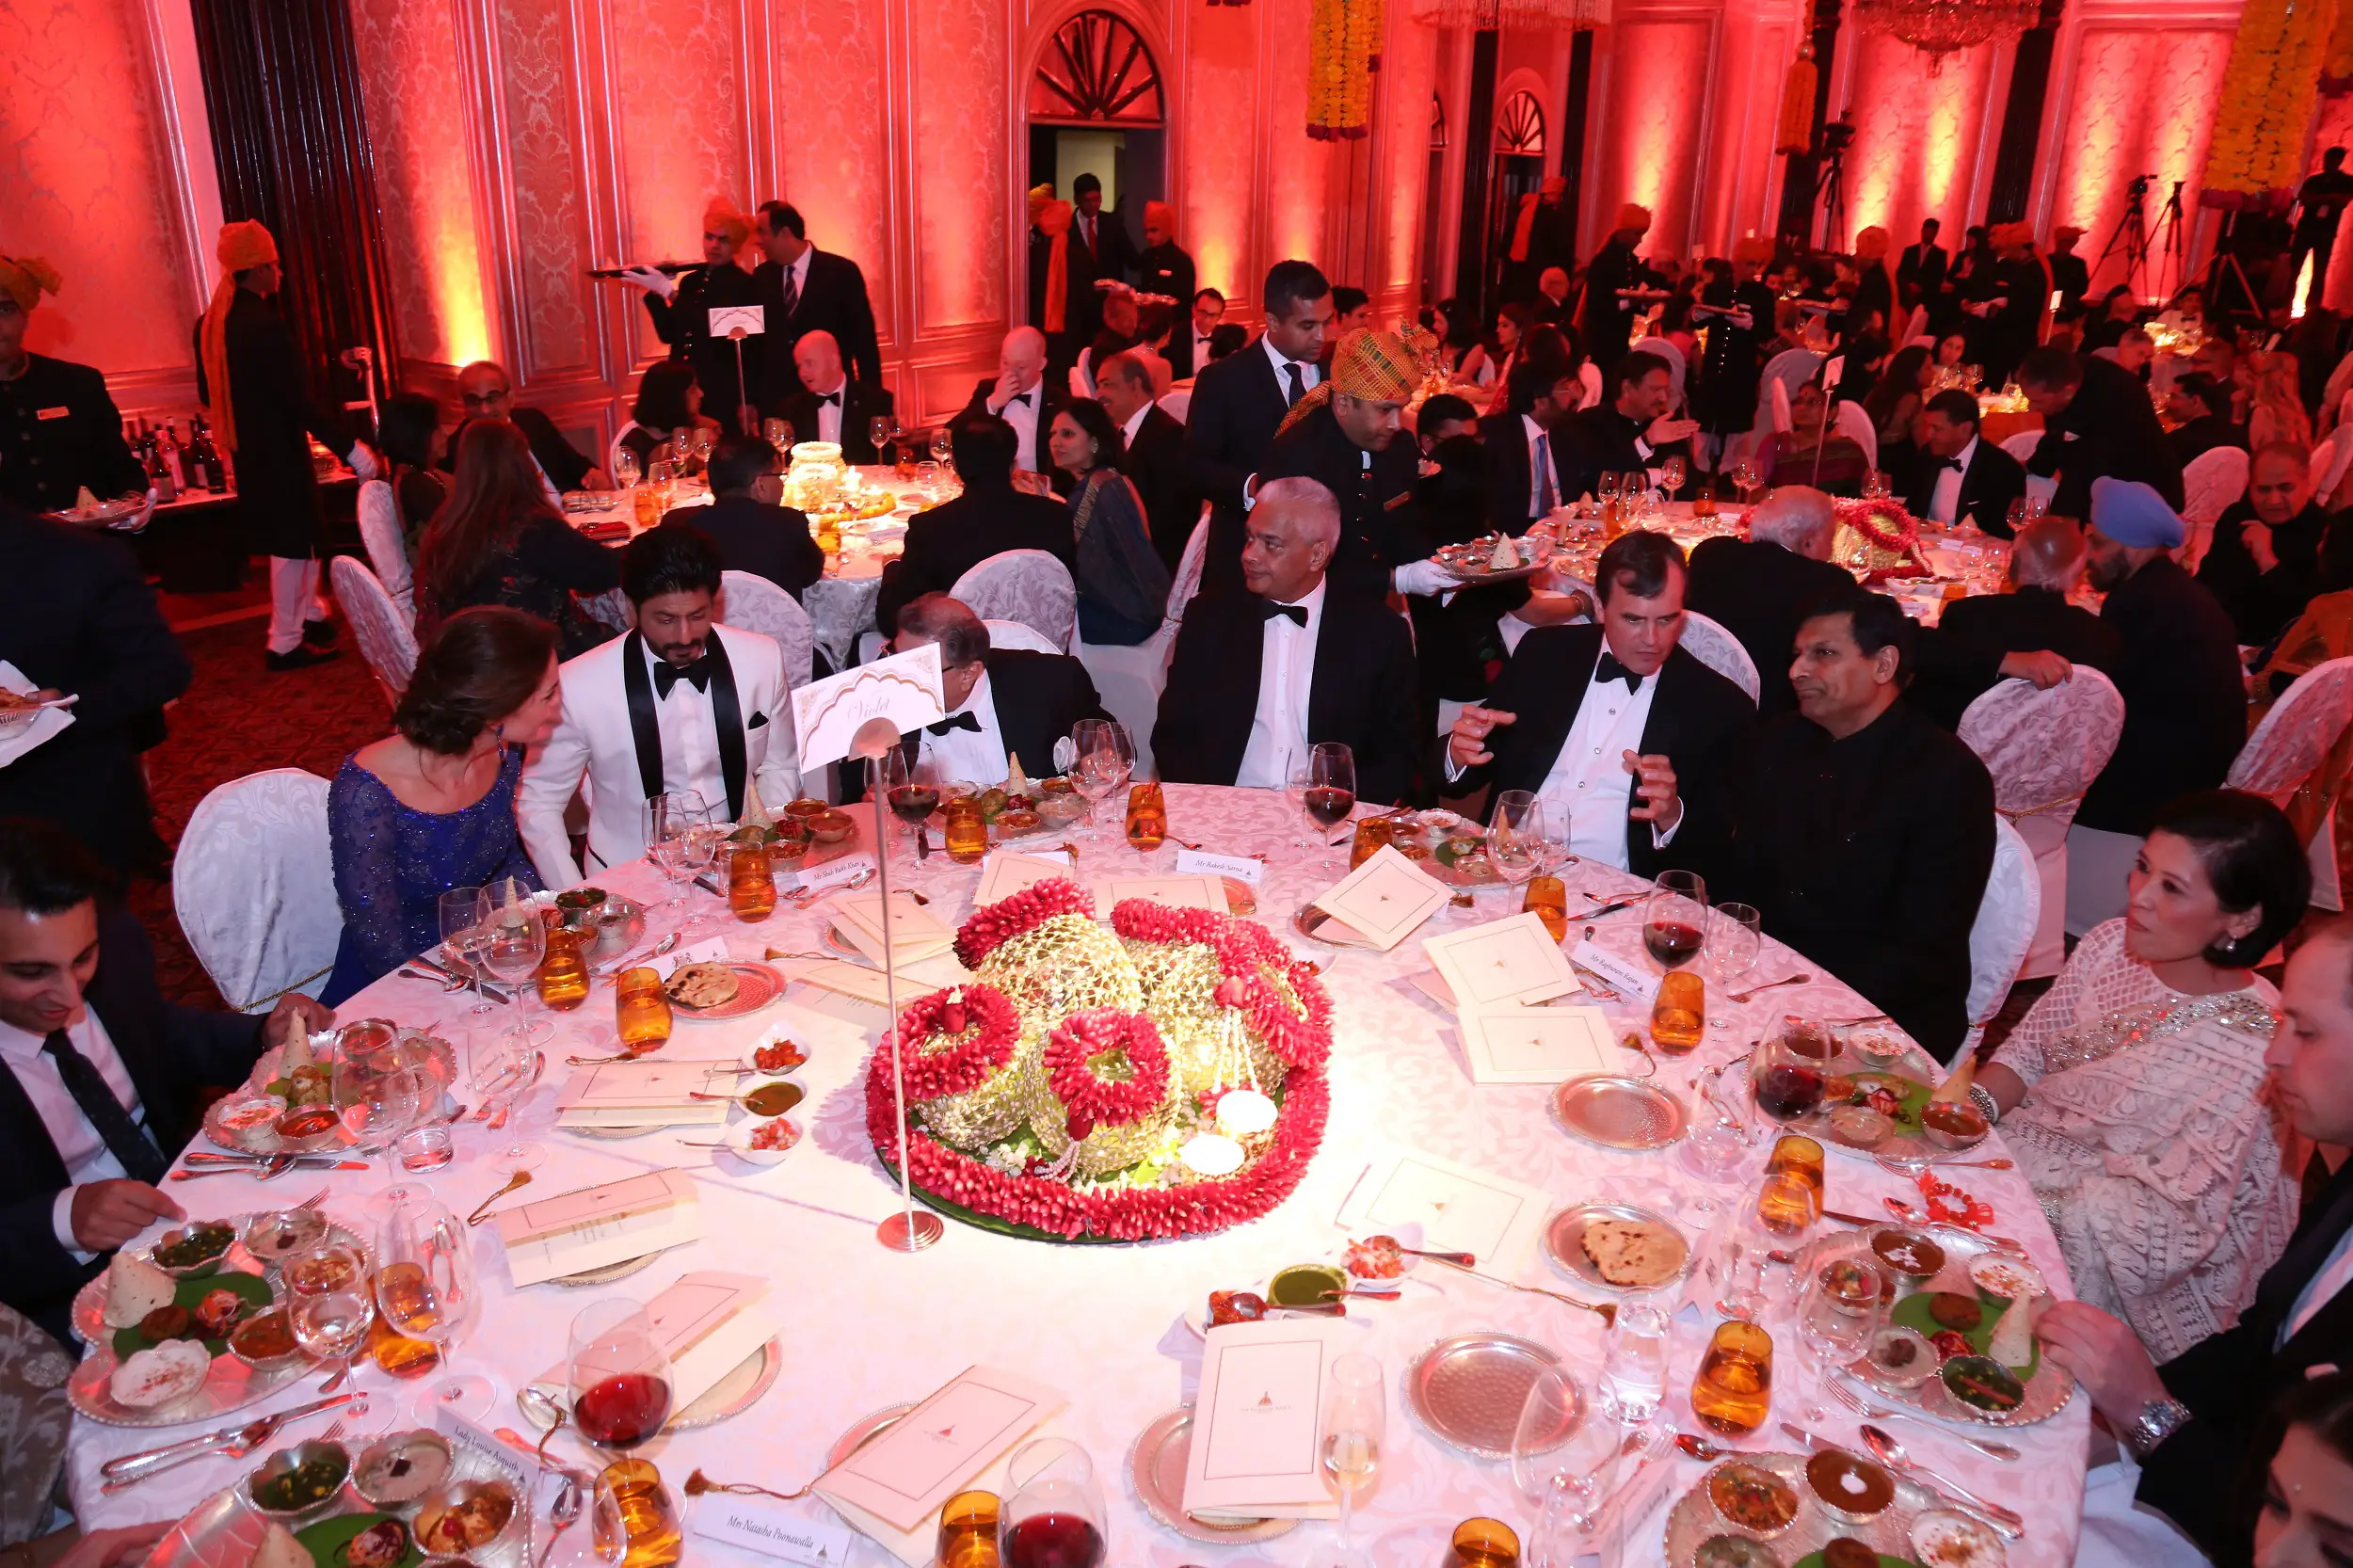 The Duke and Duchess of Cambridge at the Dinner table of Bollywood Gala